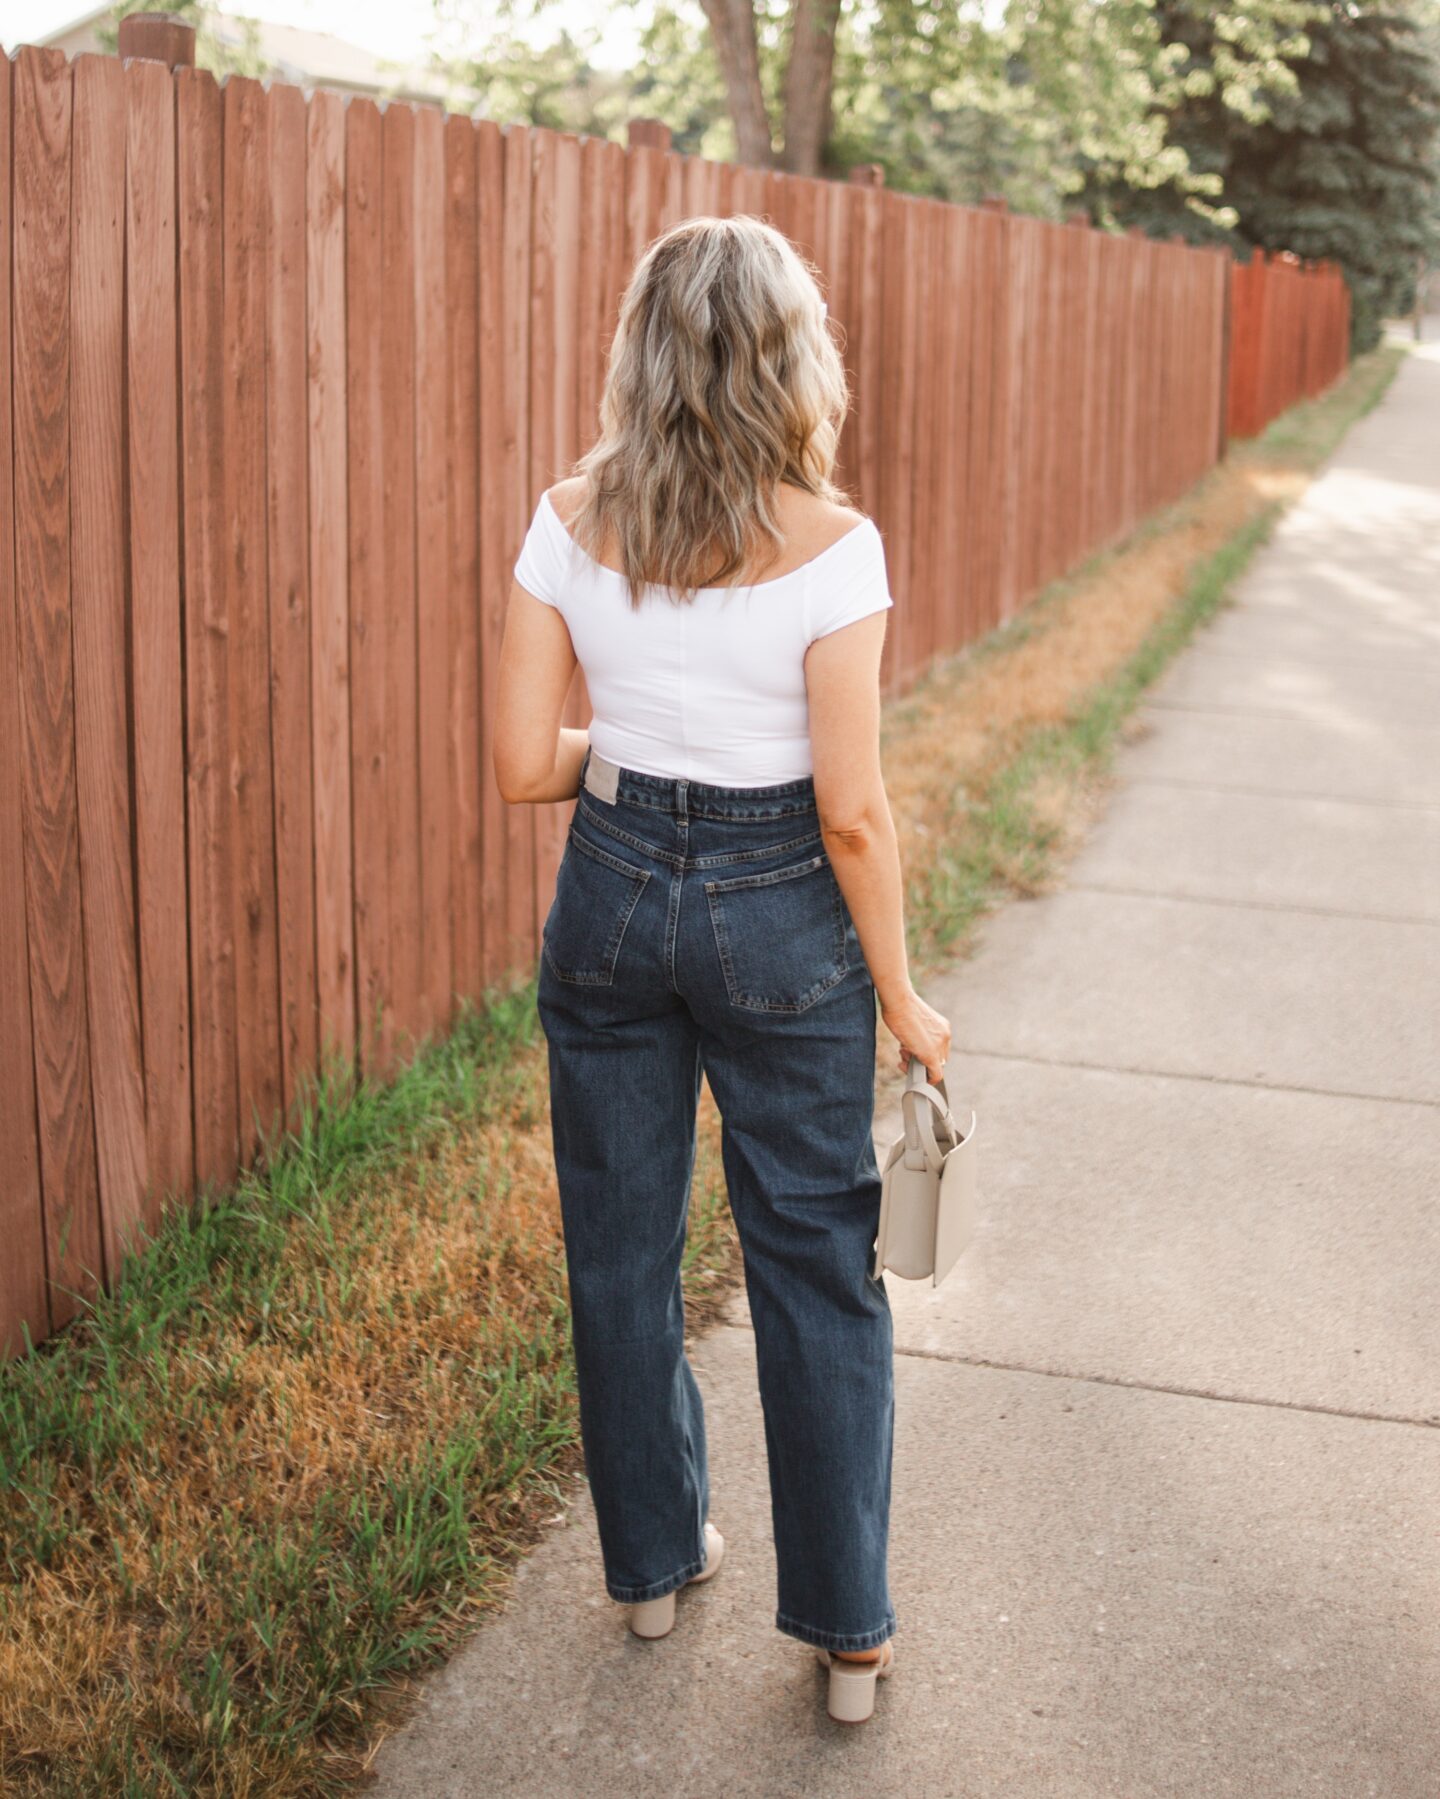 Karin Emily wears the Everlane Way High Baggy Jean, white bodysuit, nude sandals heels for her Everlane Denim Guide